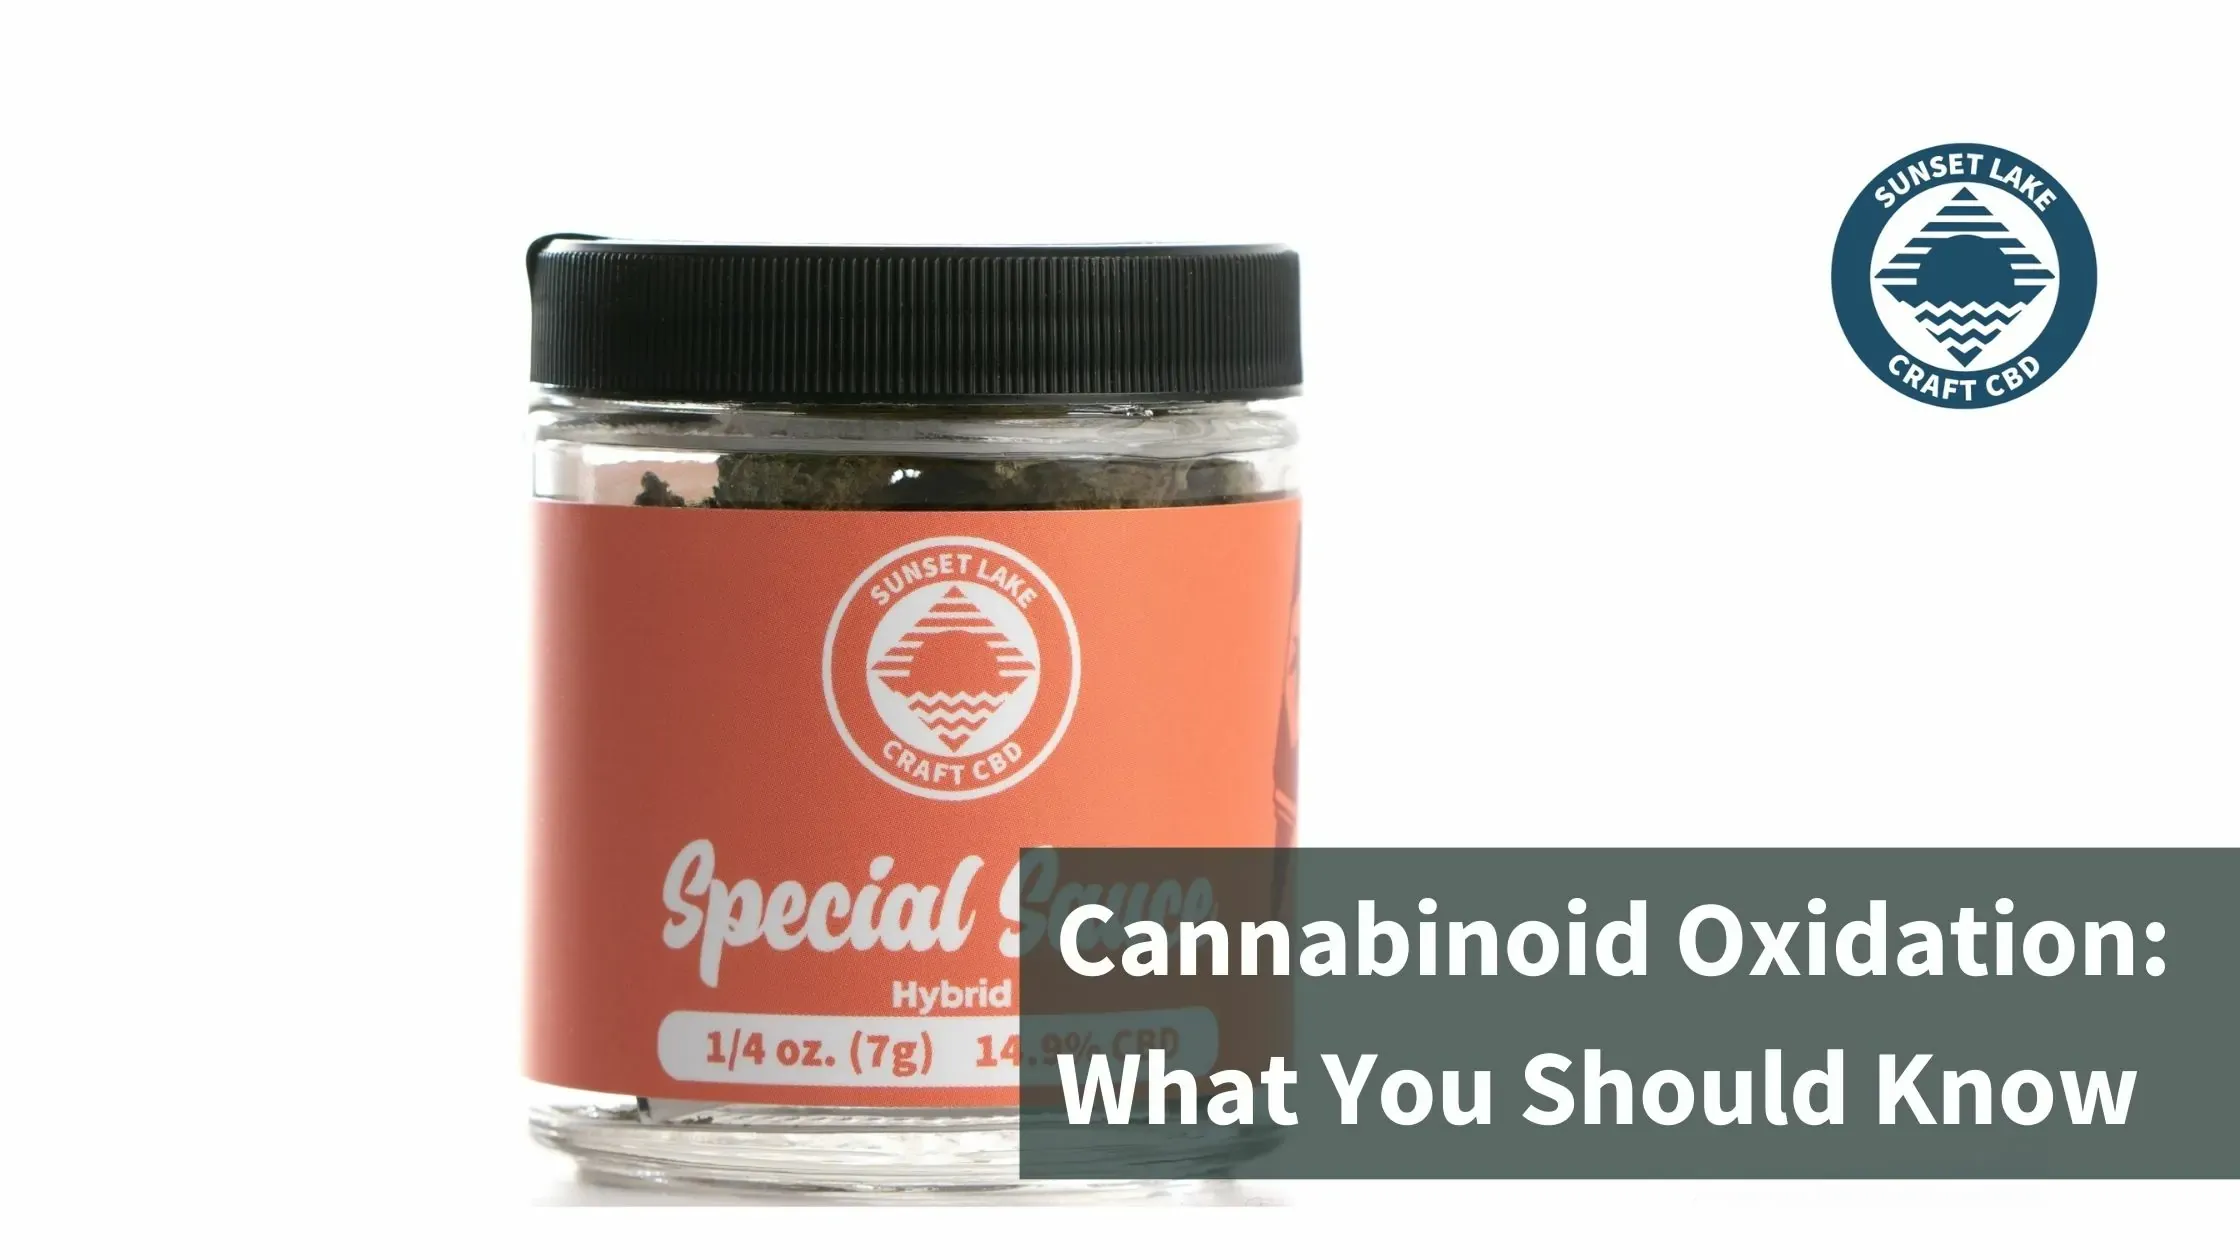 A jar of Special Sauce hemp flower with text that reads "Cannabinoid Oxidation: What you should know"